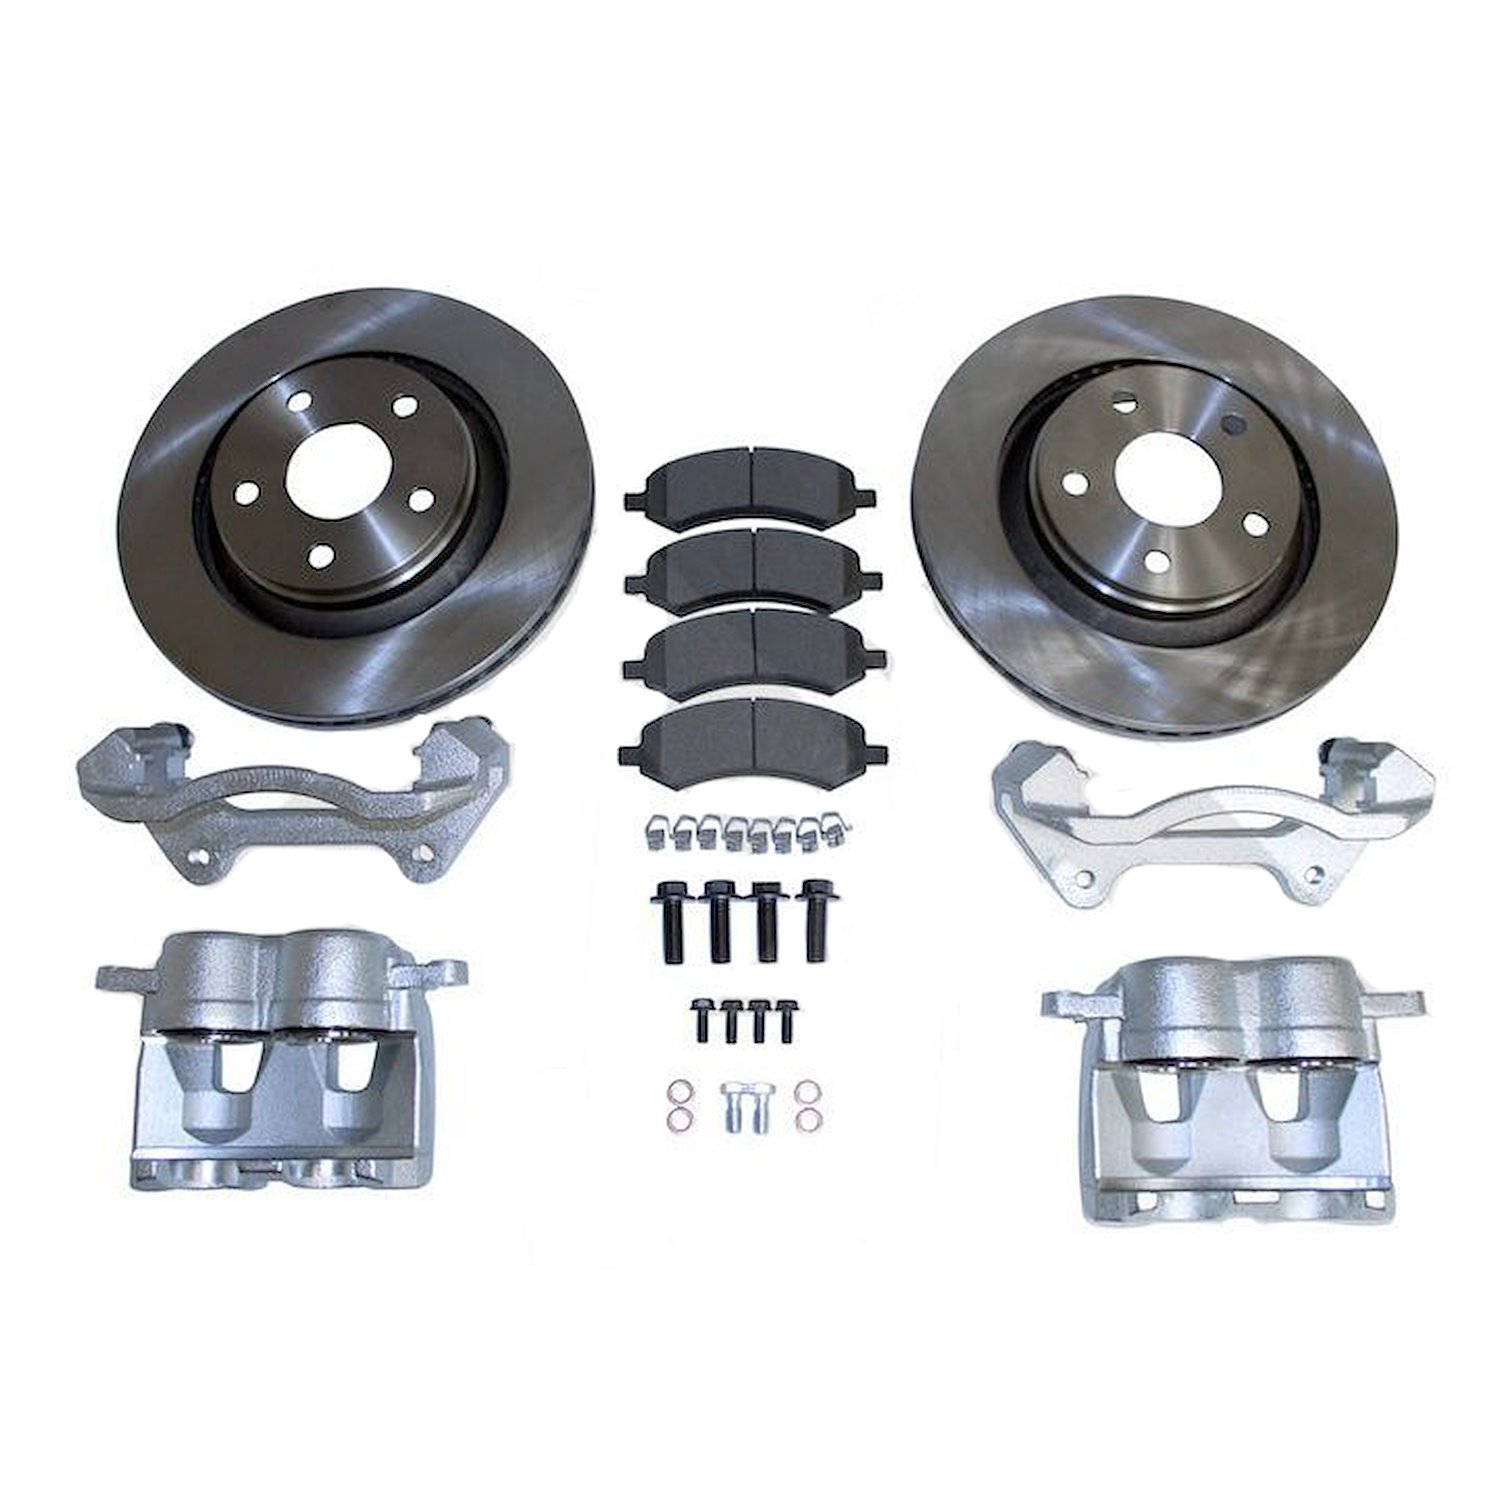 RT31046  Front Big Brake Kit with 13" Vented Rotors & Dual Piston Calipers for 2007-2018 Jeep JK Wrangler